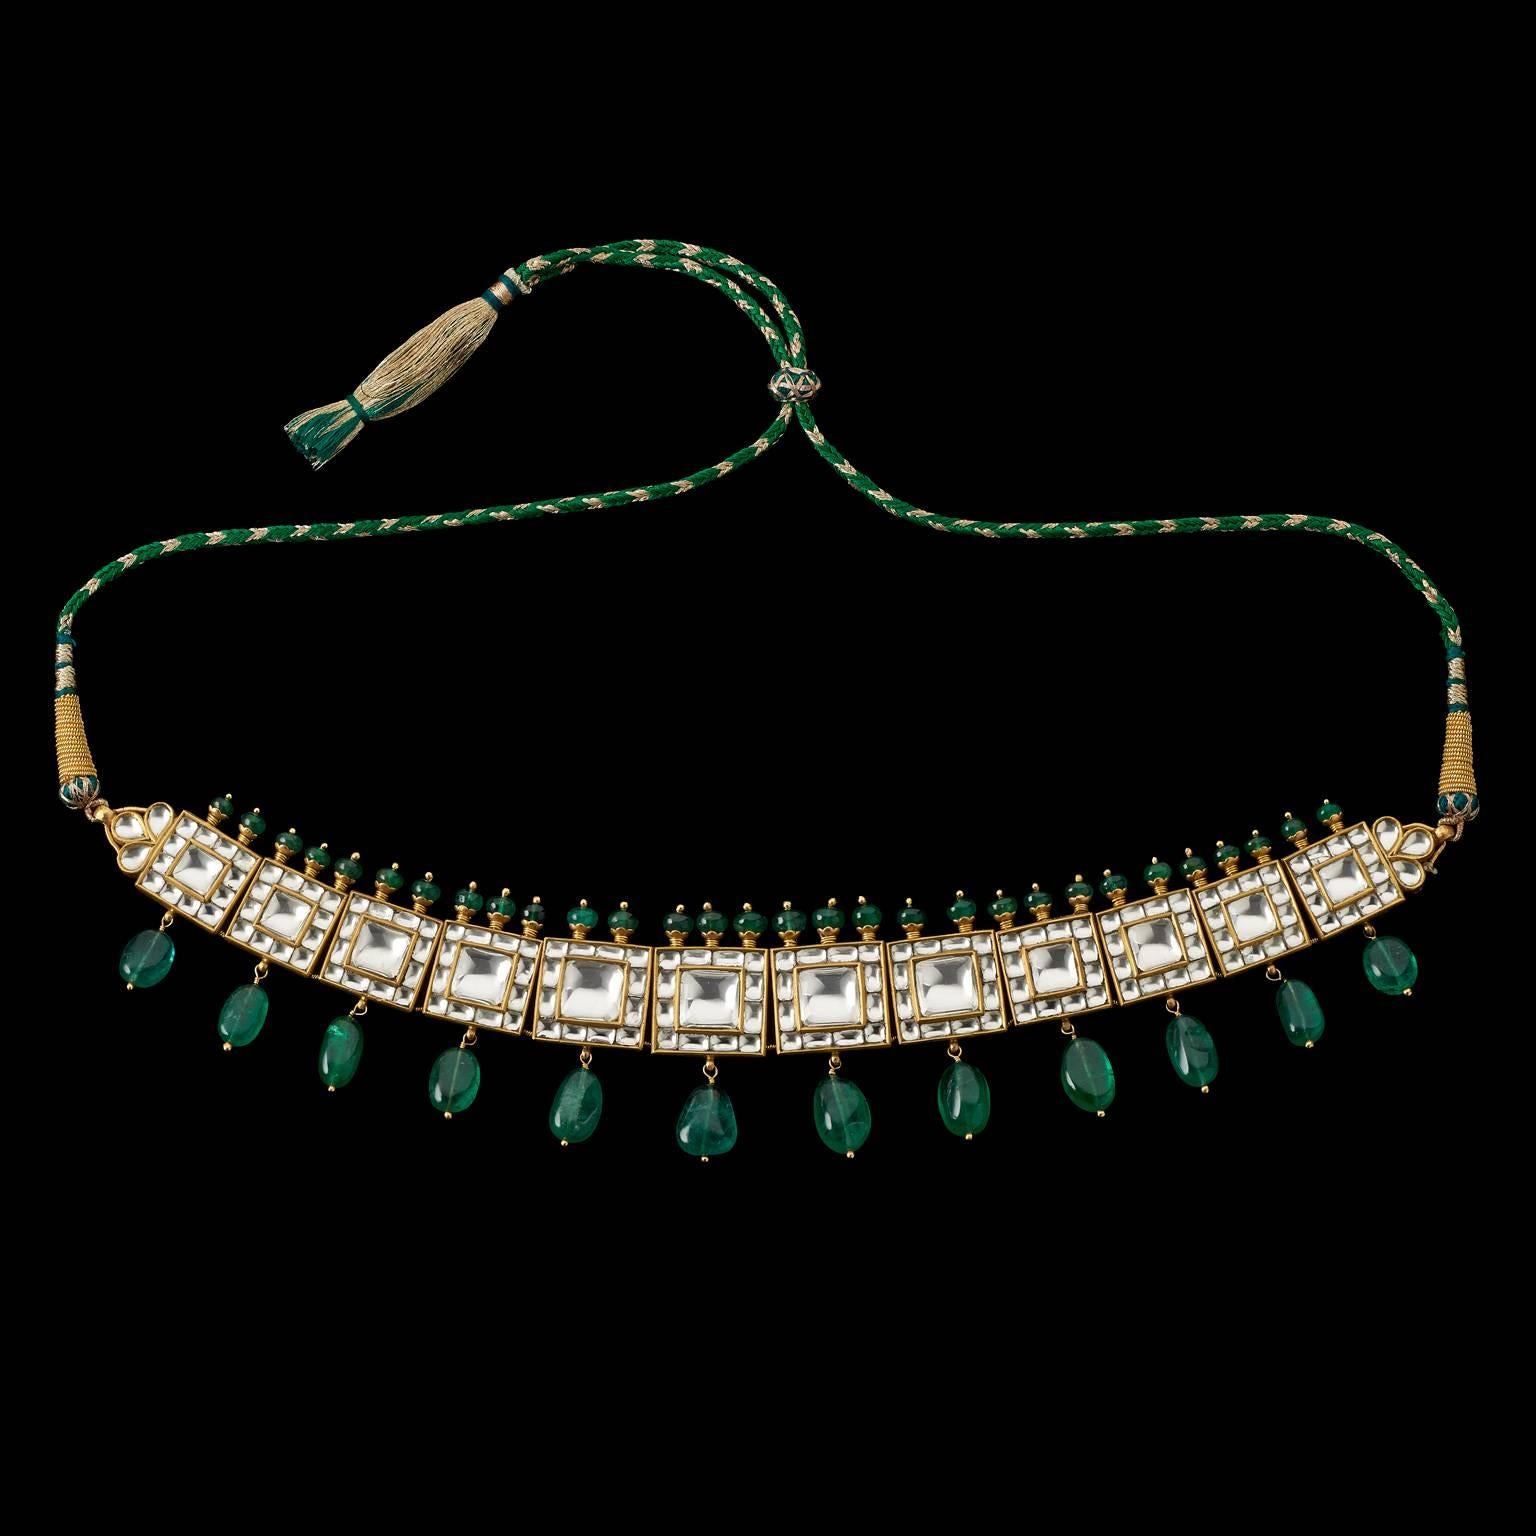 Necklace
Jaipur, Rajasthan, India
20th Century

Fabricated from gold, the necklace has square panels set with rock crystal in a square arrangement, each plaque suspending an emerald drop and surmounted with a fringe of emerald beads. The reverse